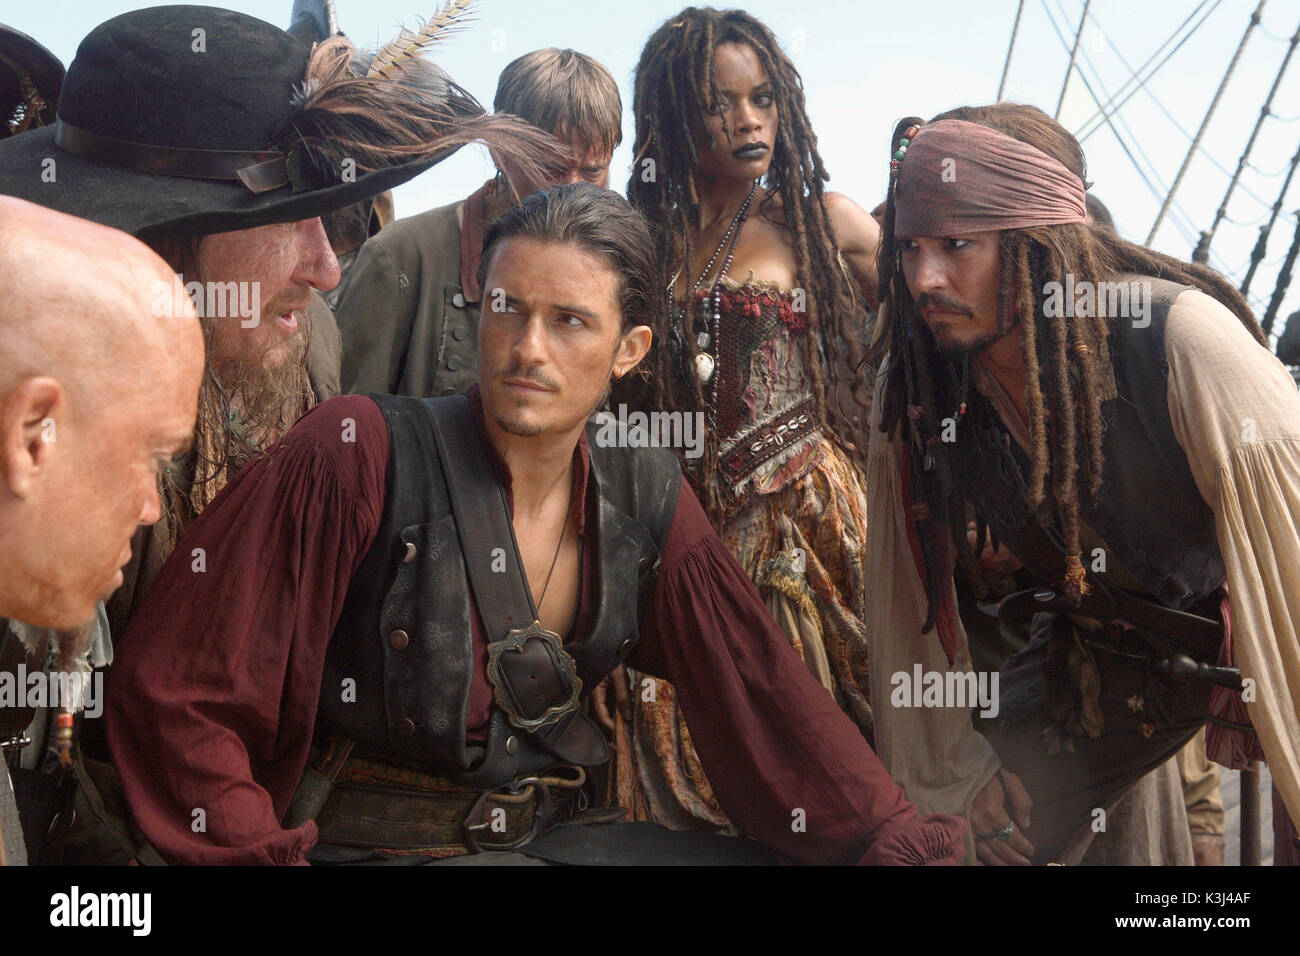 Pictured L-R: Marty (MARTIN KLEBBA), Captain Barbossa (Geoffrey Rush), Will Turner (ORLANDO BLOOM), Tia Dalma (NAOMIE HARRIS), and Captain Jack Sparrow (JOHNNY DEPP) in a scene from PIRATES OF THE CARIBBEAN: AT WORLD'S END, directed by Gore Verbinski and produced by Jerry Bruckheimer, from a screenplay written by Ted Elliott & Terry Rossio.  PIRATES OF THE CARIBBEAN: AT WORLD'S END [US 2007]  aka PIRATES OF THE CARIBBEAN 3      Date: 2007 Stock Photo